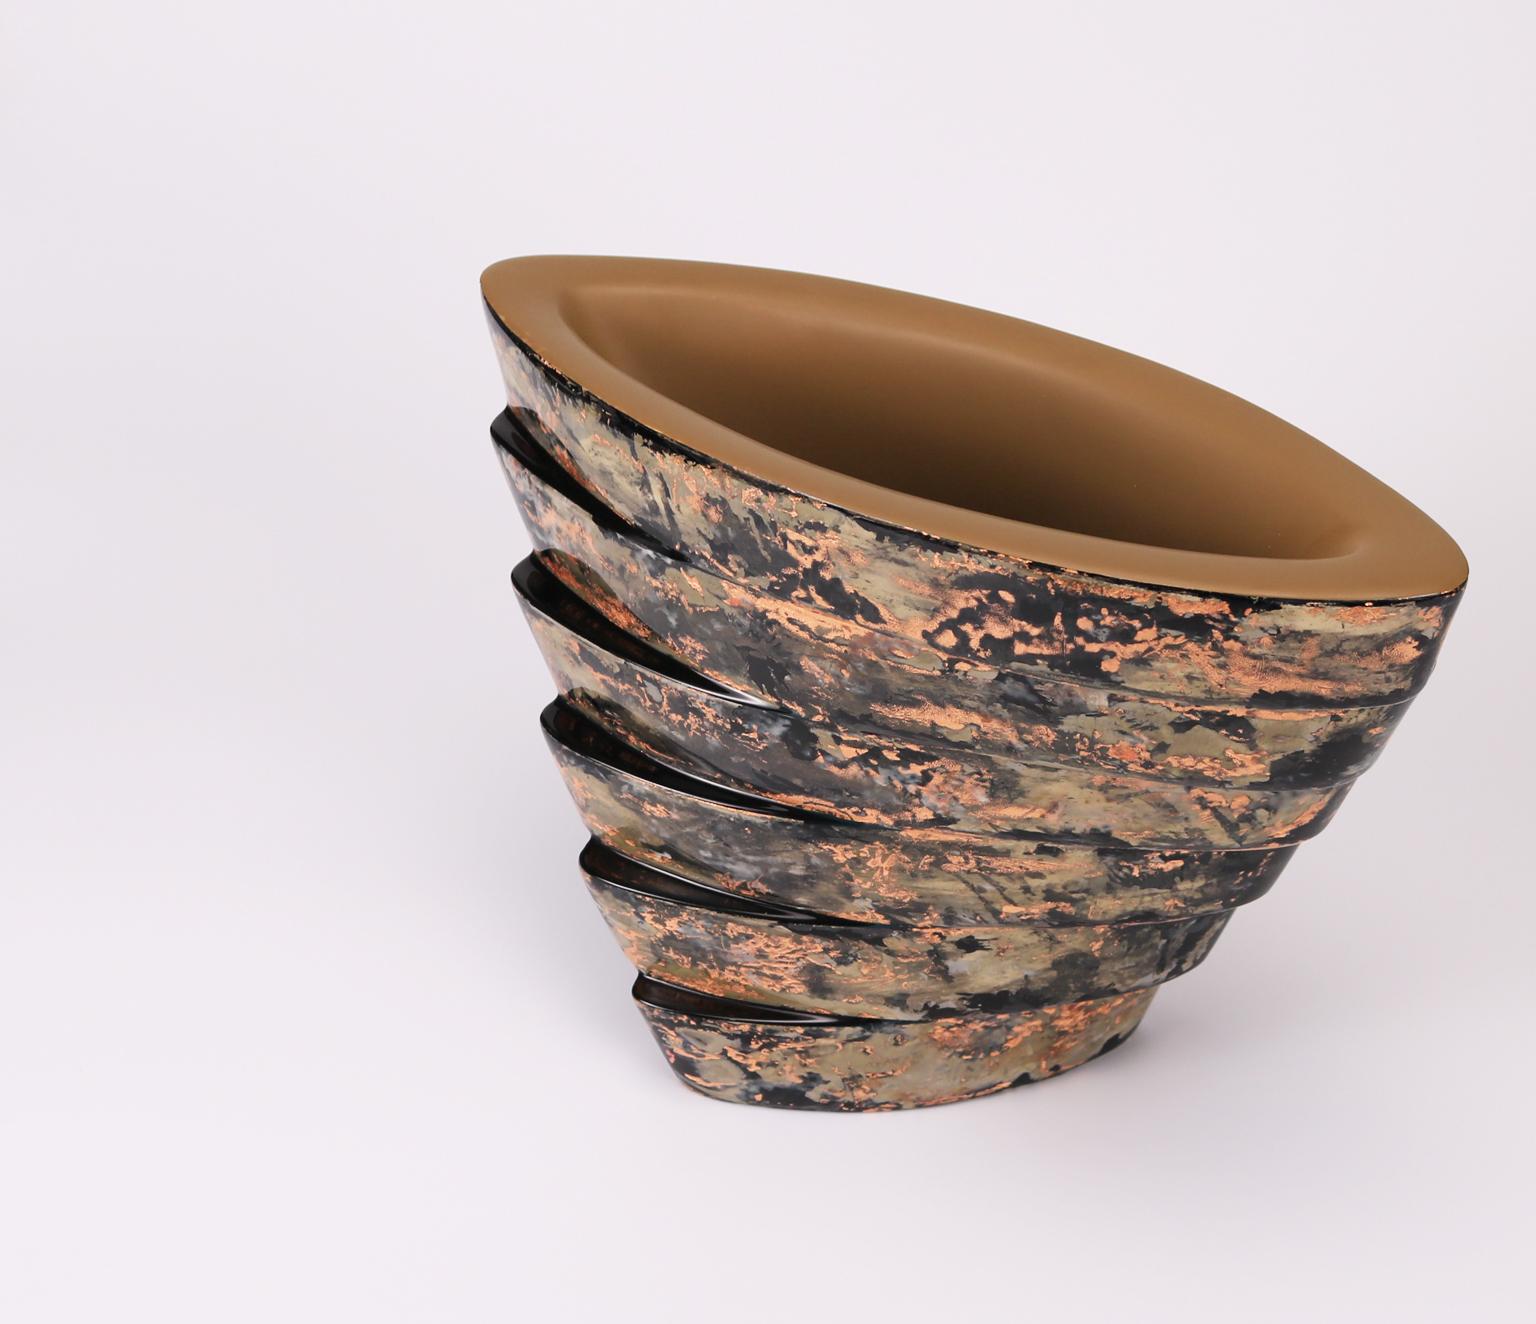 Contemporary Modern Double Shell Deconstructed Lacquered Ceramic Vessel by Golem of Italy For Sale